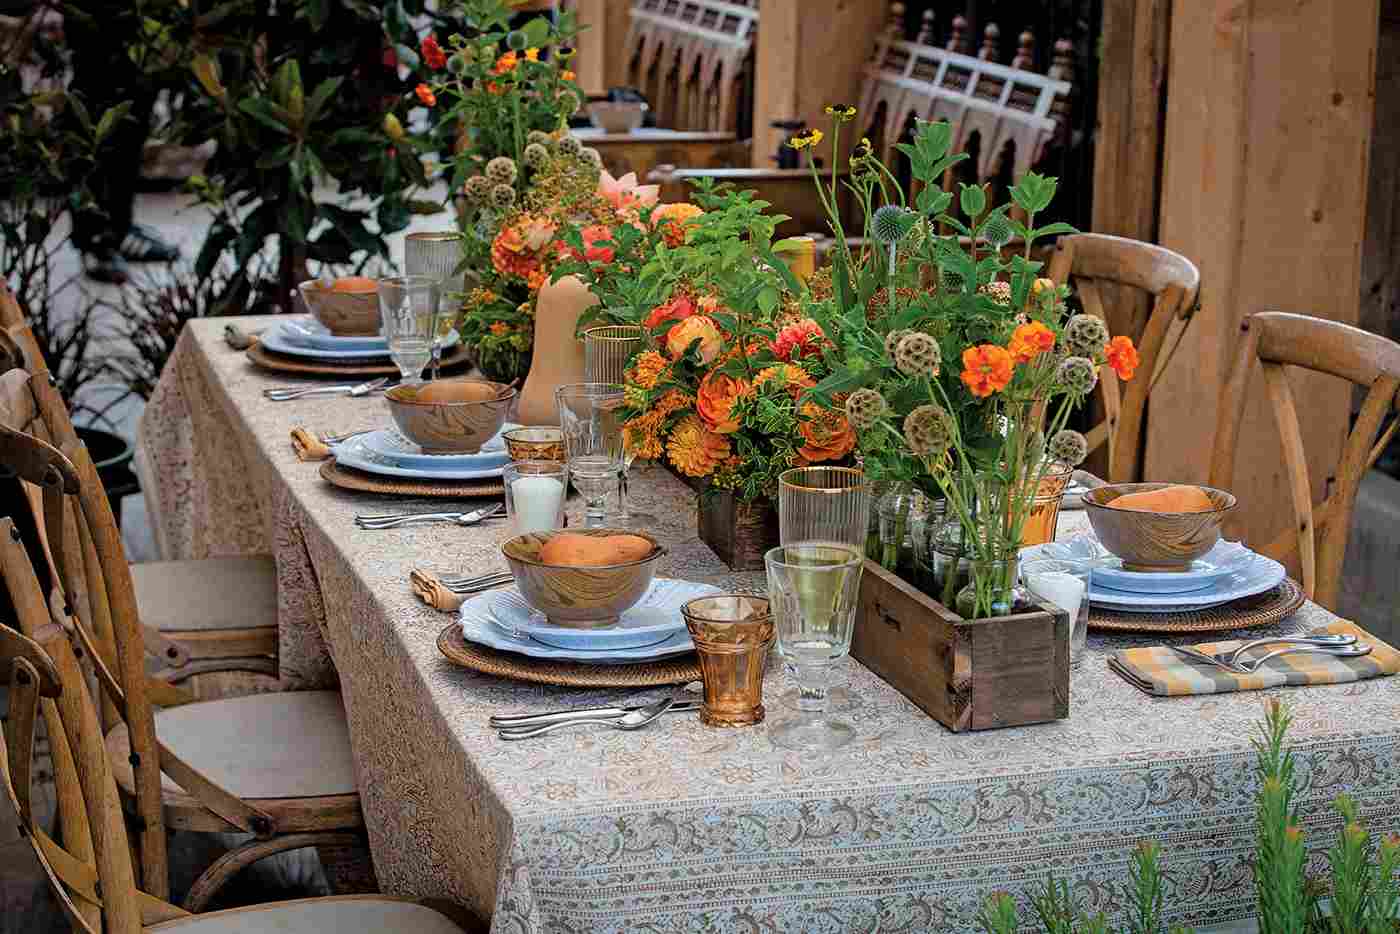 Make a hearty table decoration with dahlias and pumpkins for the Thanksgiving dinner